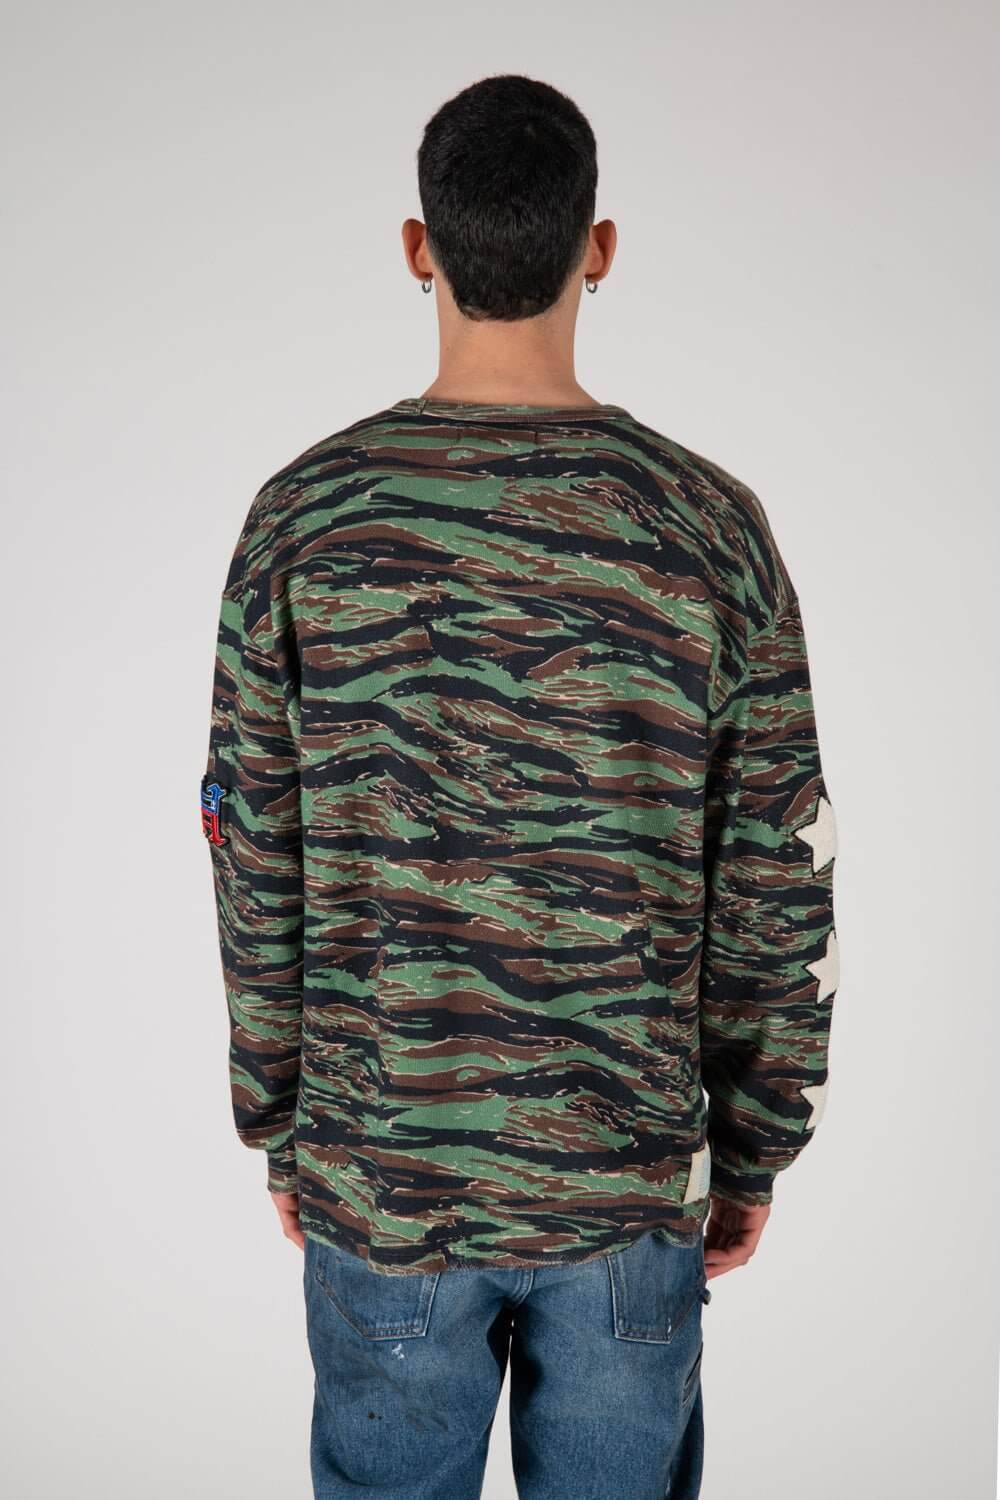 LUCKY KID - CAMO Regular fit long sleeve camo t-shirt. Patches on the sleeves. Composition: 100% Cotton HTC LOS ANGELES